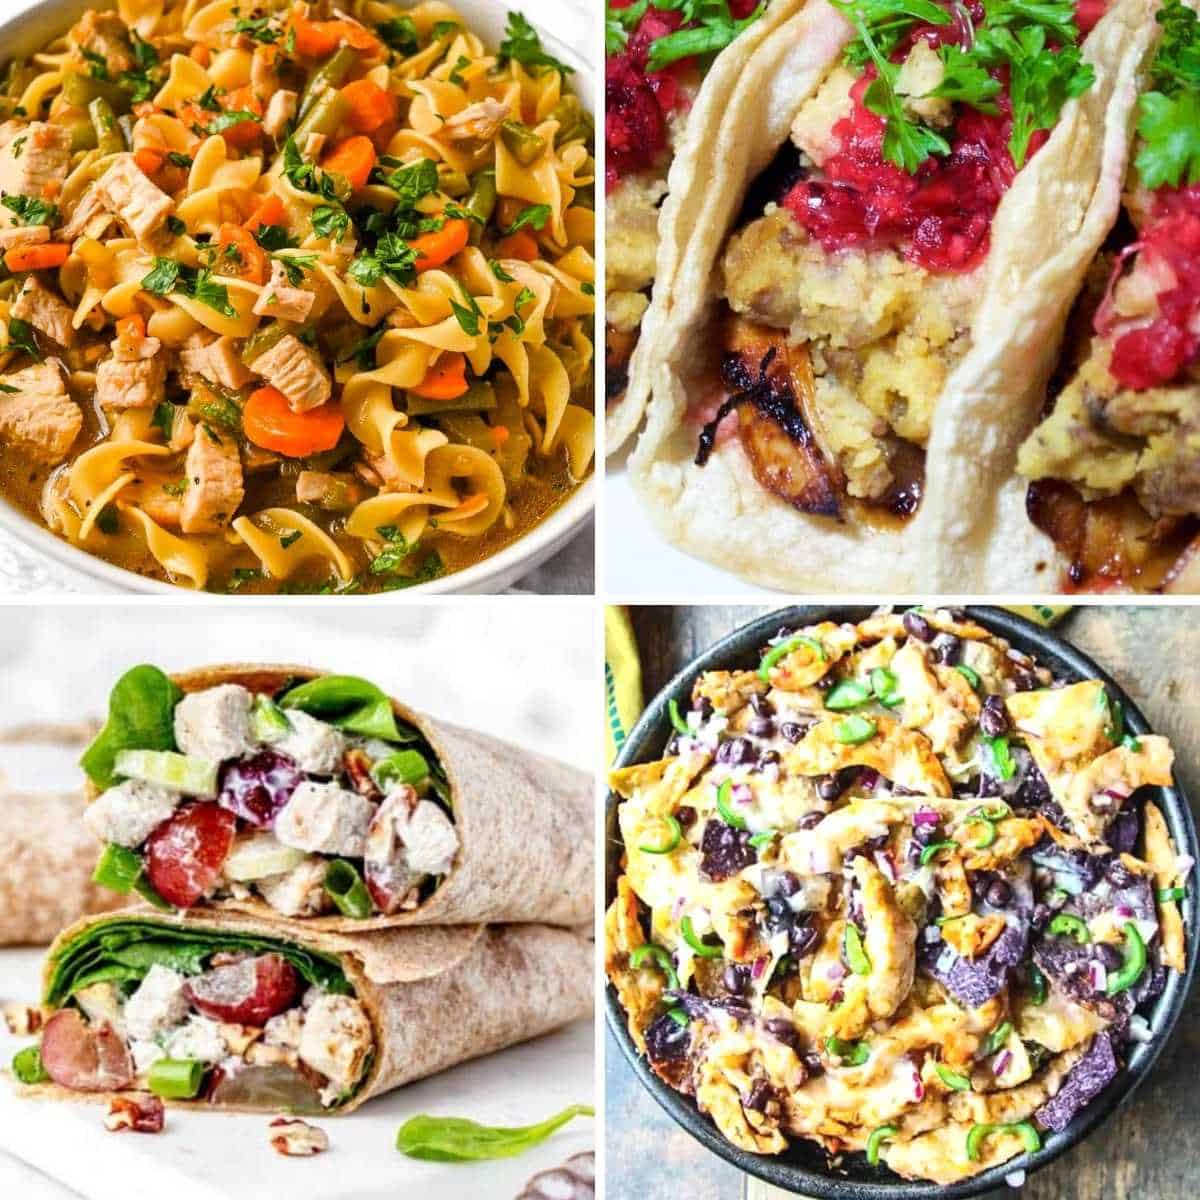 12 Best Healthy Leftover Turkey Recipes to Make!